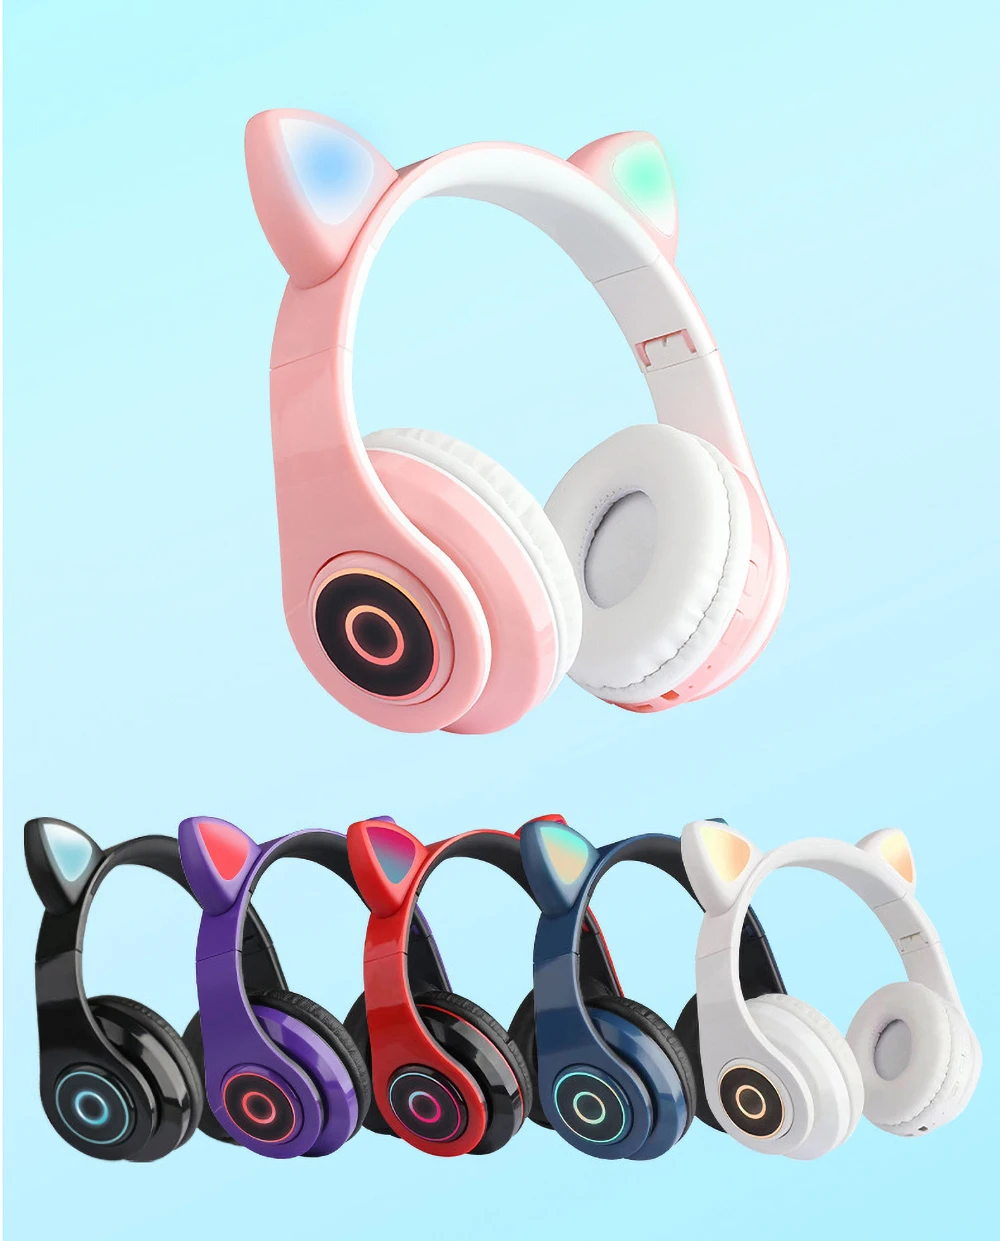 

New Arrival LED Cat Ear Noise Cancelling Headphones Bluetooth 5.0 Young People Kids Headset Support TF Card 3.5mm Plug With Mic